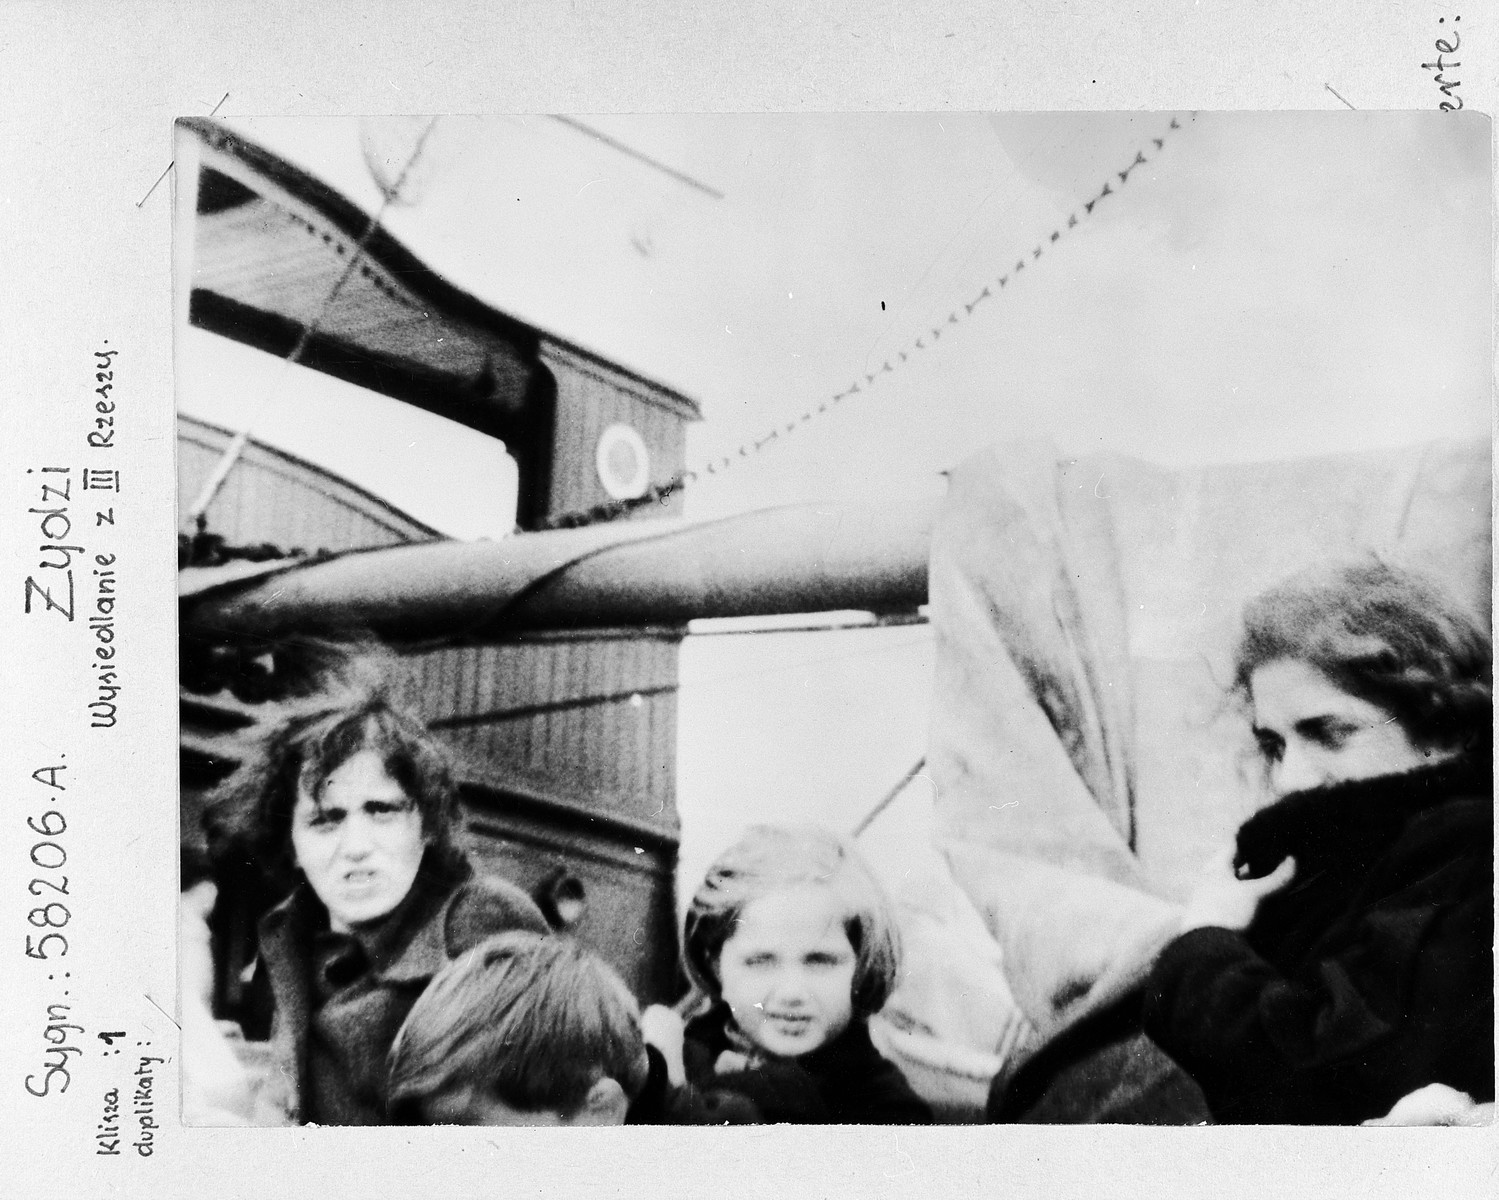 A group of German-Jewish refugee women and children aboard a Greek vessel [the Aghia Dezioni] on their way to Palestine.  

One hundred seventy  Jewish refugees came to Fiume, Italy and were placed aboard a small Greek coastal steamer. Their passports contained visas for China. However, when the ship reached the open sea, their passports were forcibly taken and thrown into the sea. The refugees were told they would disembark in Palestine. After 36 days of floundering in the eastern Mediterranean and severe mistreatment aboard ship, 120 refugees managed to enter Palestine. There they were discovered by the British army and placed in the Sarafend camp for new immigrants.